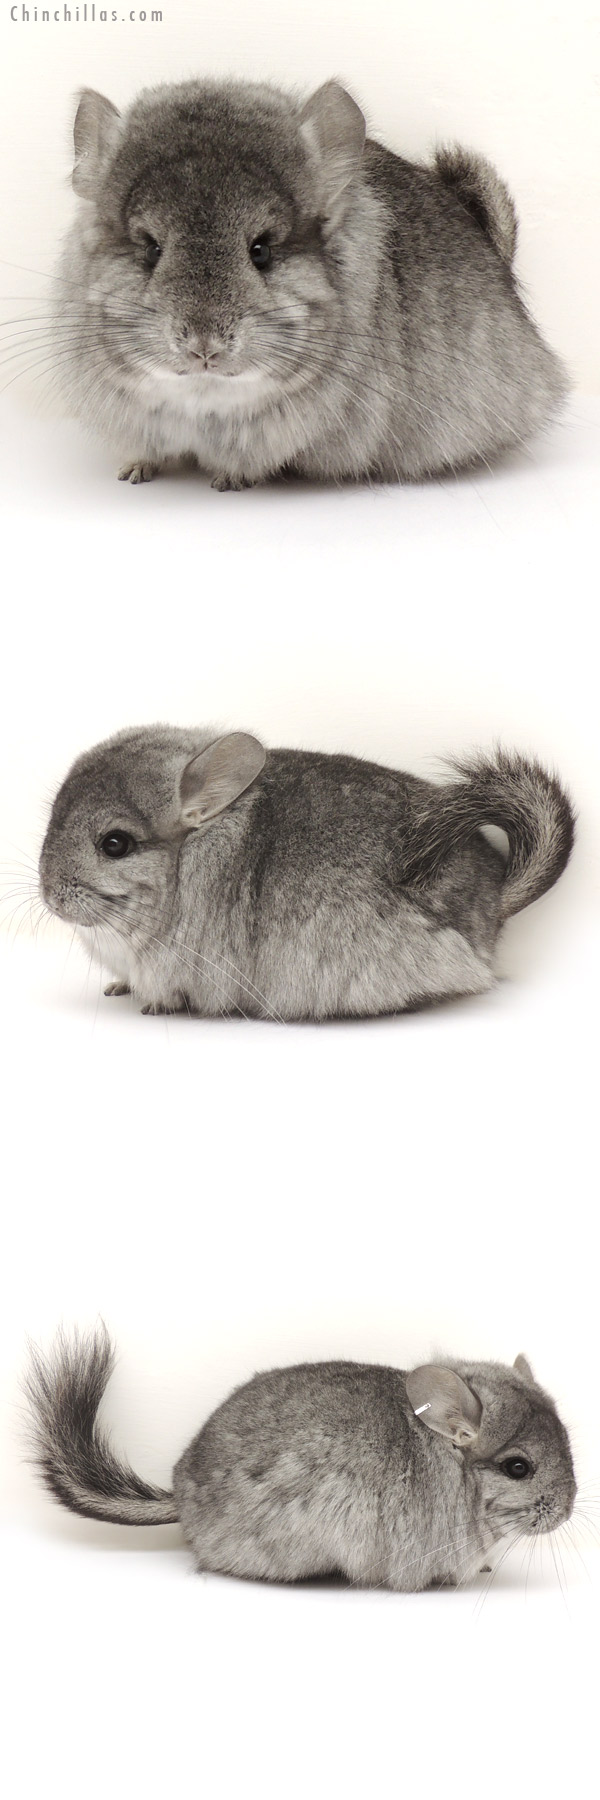 Chinchilla or related item offered for sale or export on Chinchillas.com - 14113 Standard Royal Persian Angora Female Chinchilla